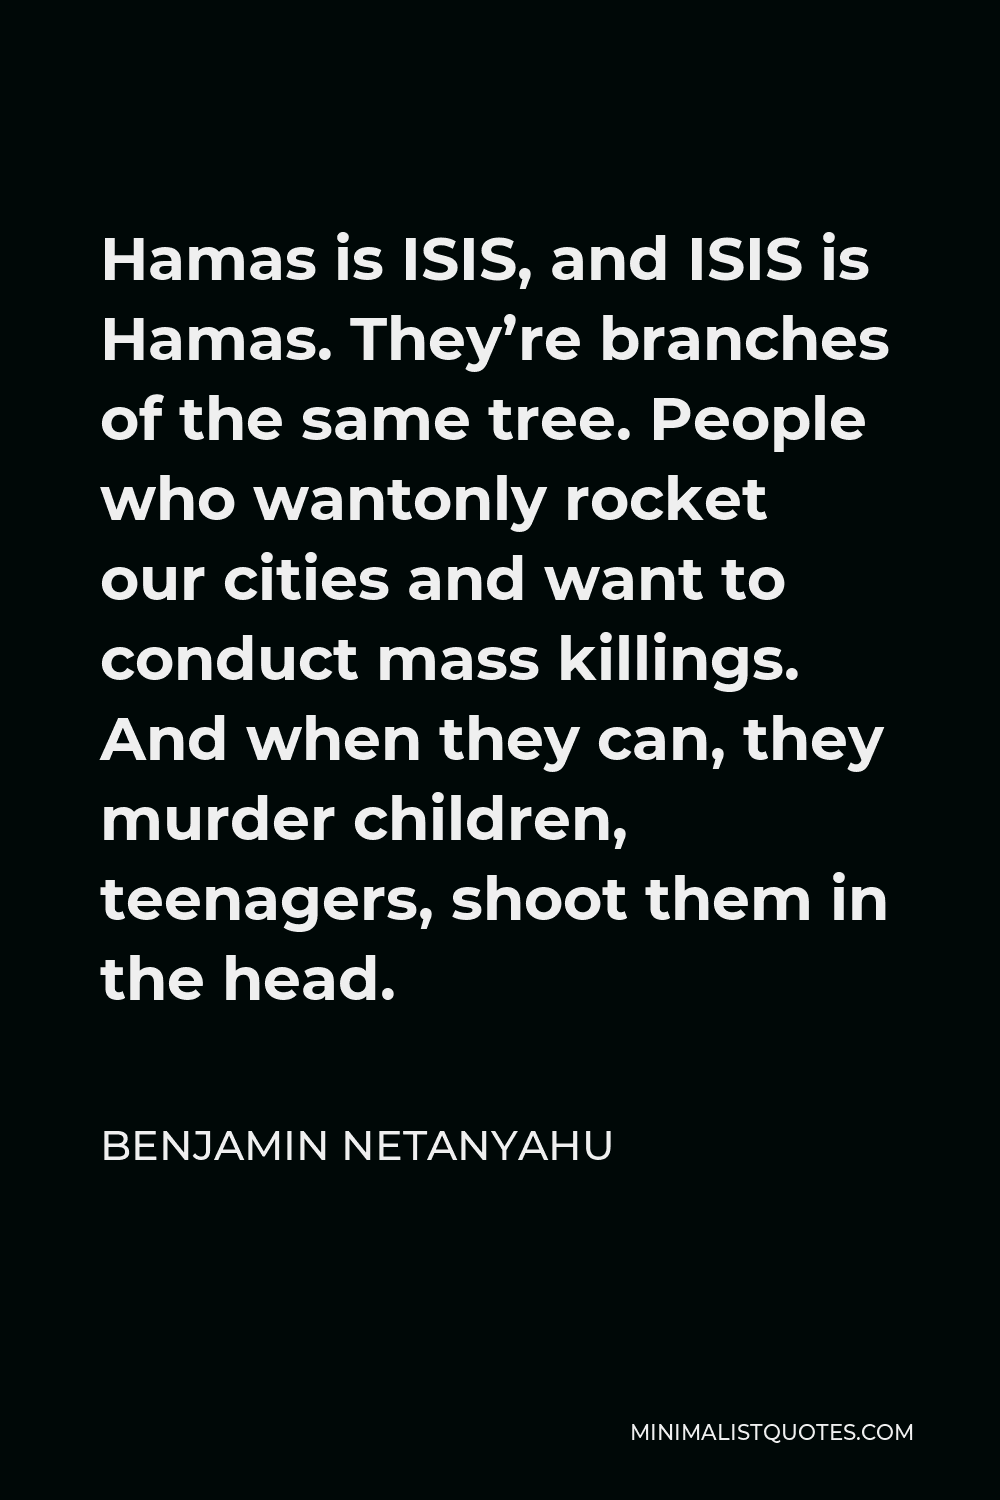 Benjamin Netanyahu Quote - Hamas is ISIS, and ISIS is Hamas. They’re branches of the same tree. People who wantonly rocket our cities and want to conduct mass killings. And when they can, they murder children, teenagers, shoot them in the head.